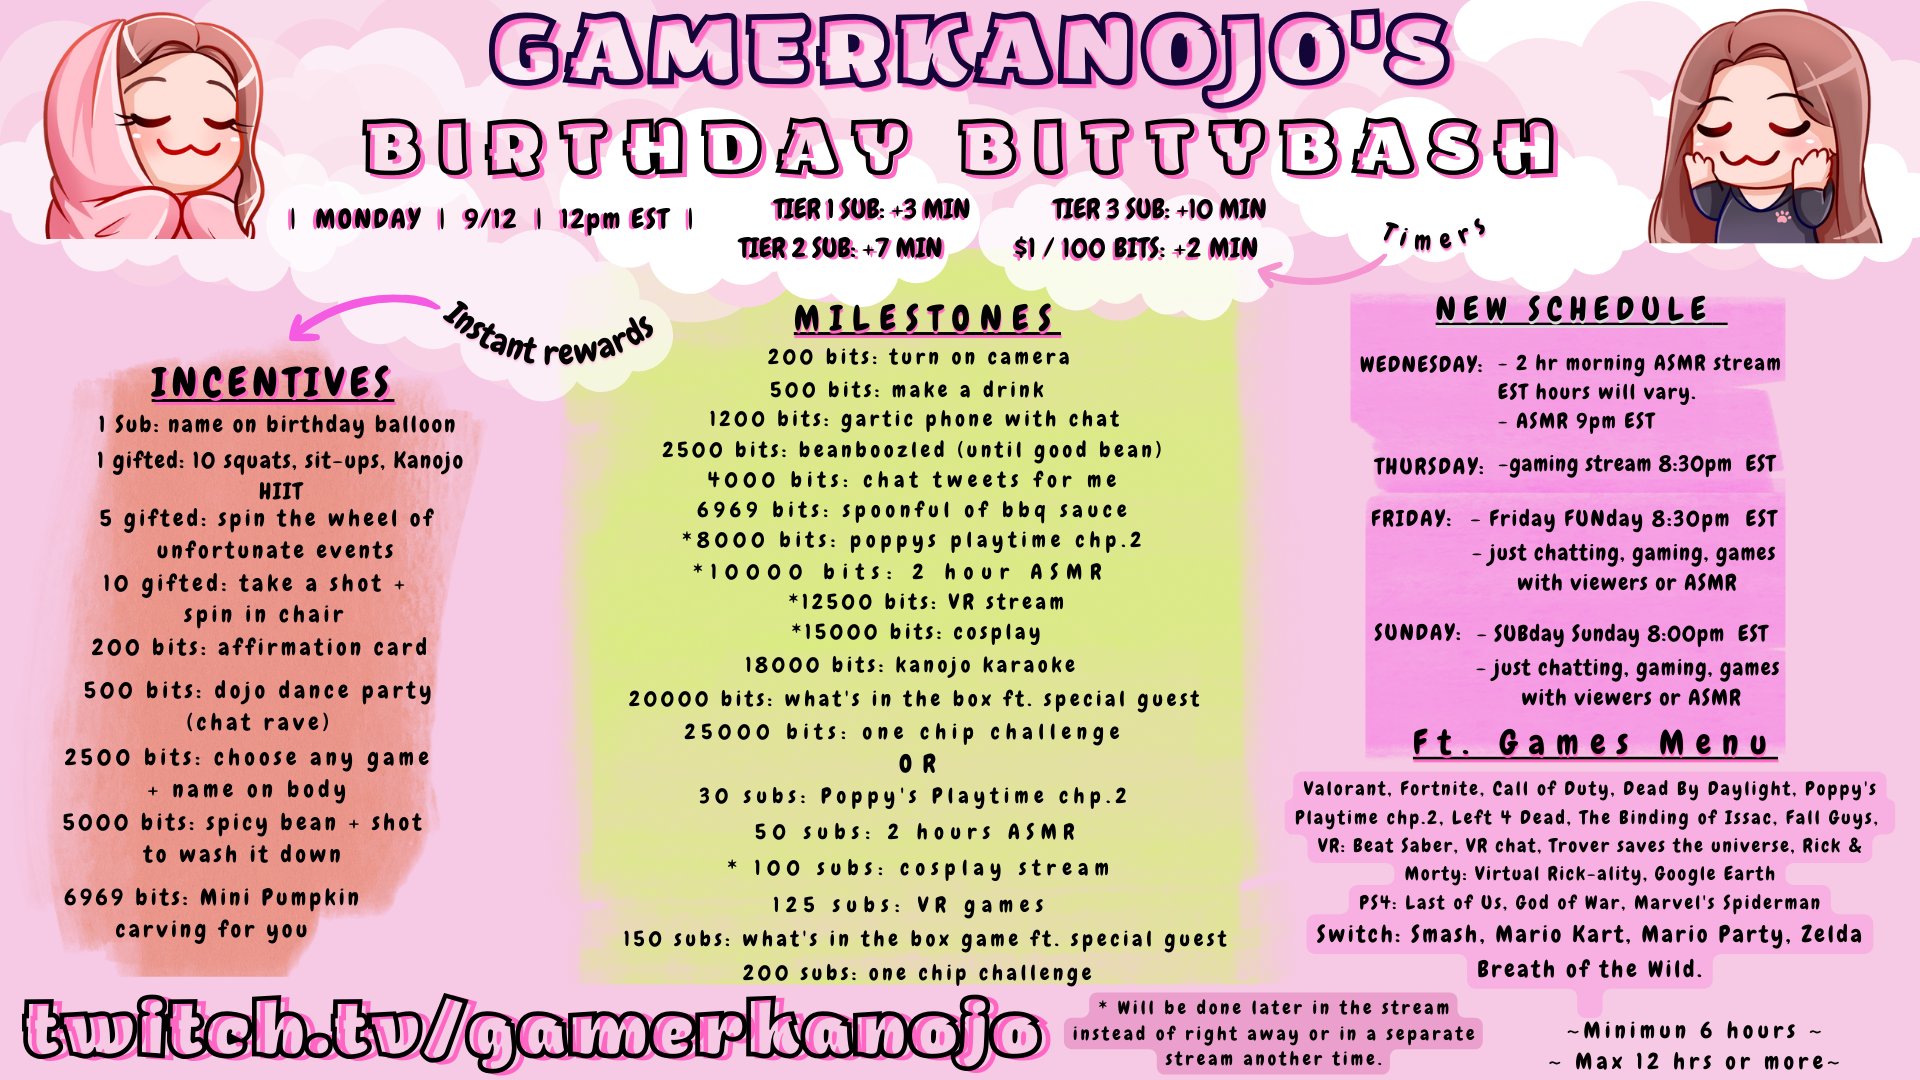 GamerKanojo on Twitter: INVITED! :D come to my birthday party!!!! #live https://t.co/YJvrPGpo3D" / Twitter